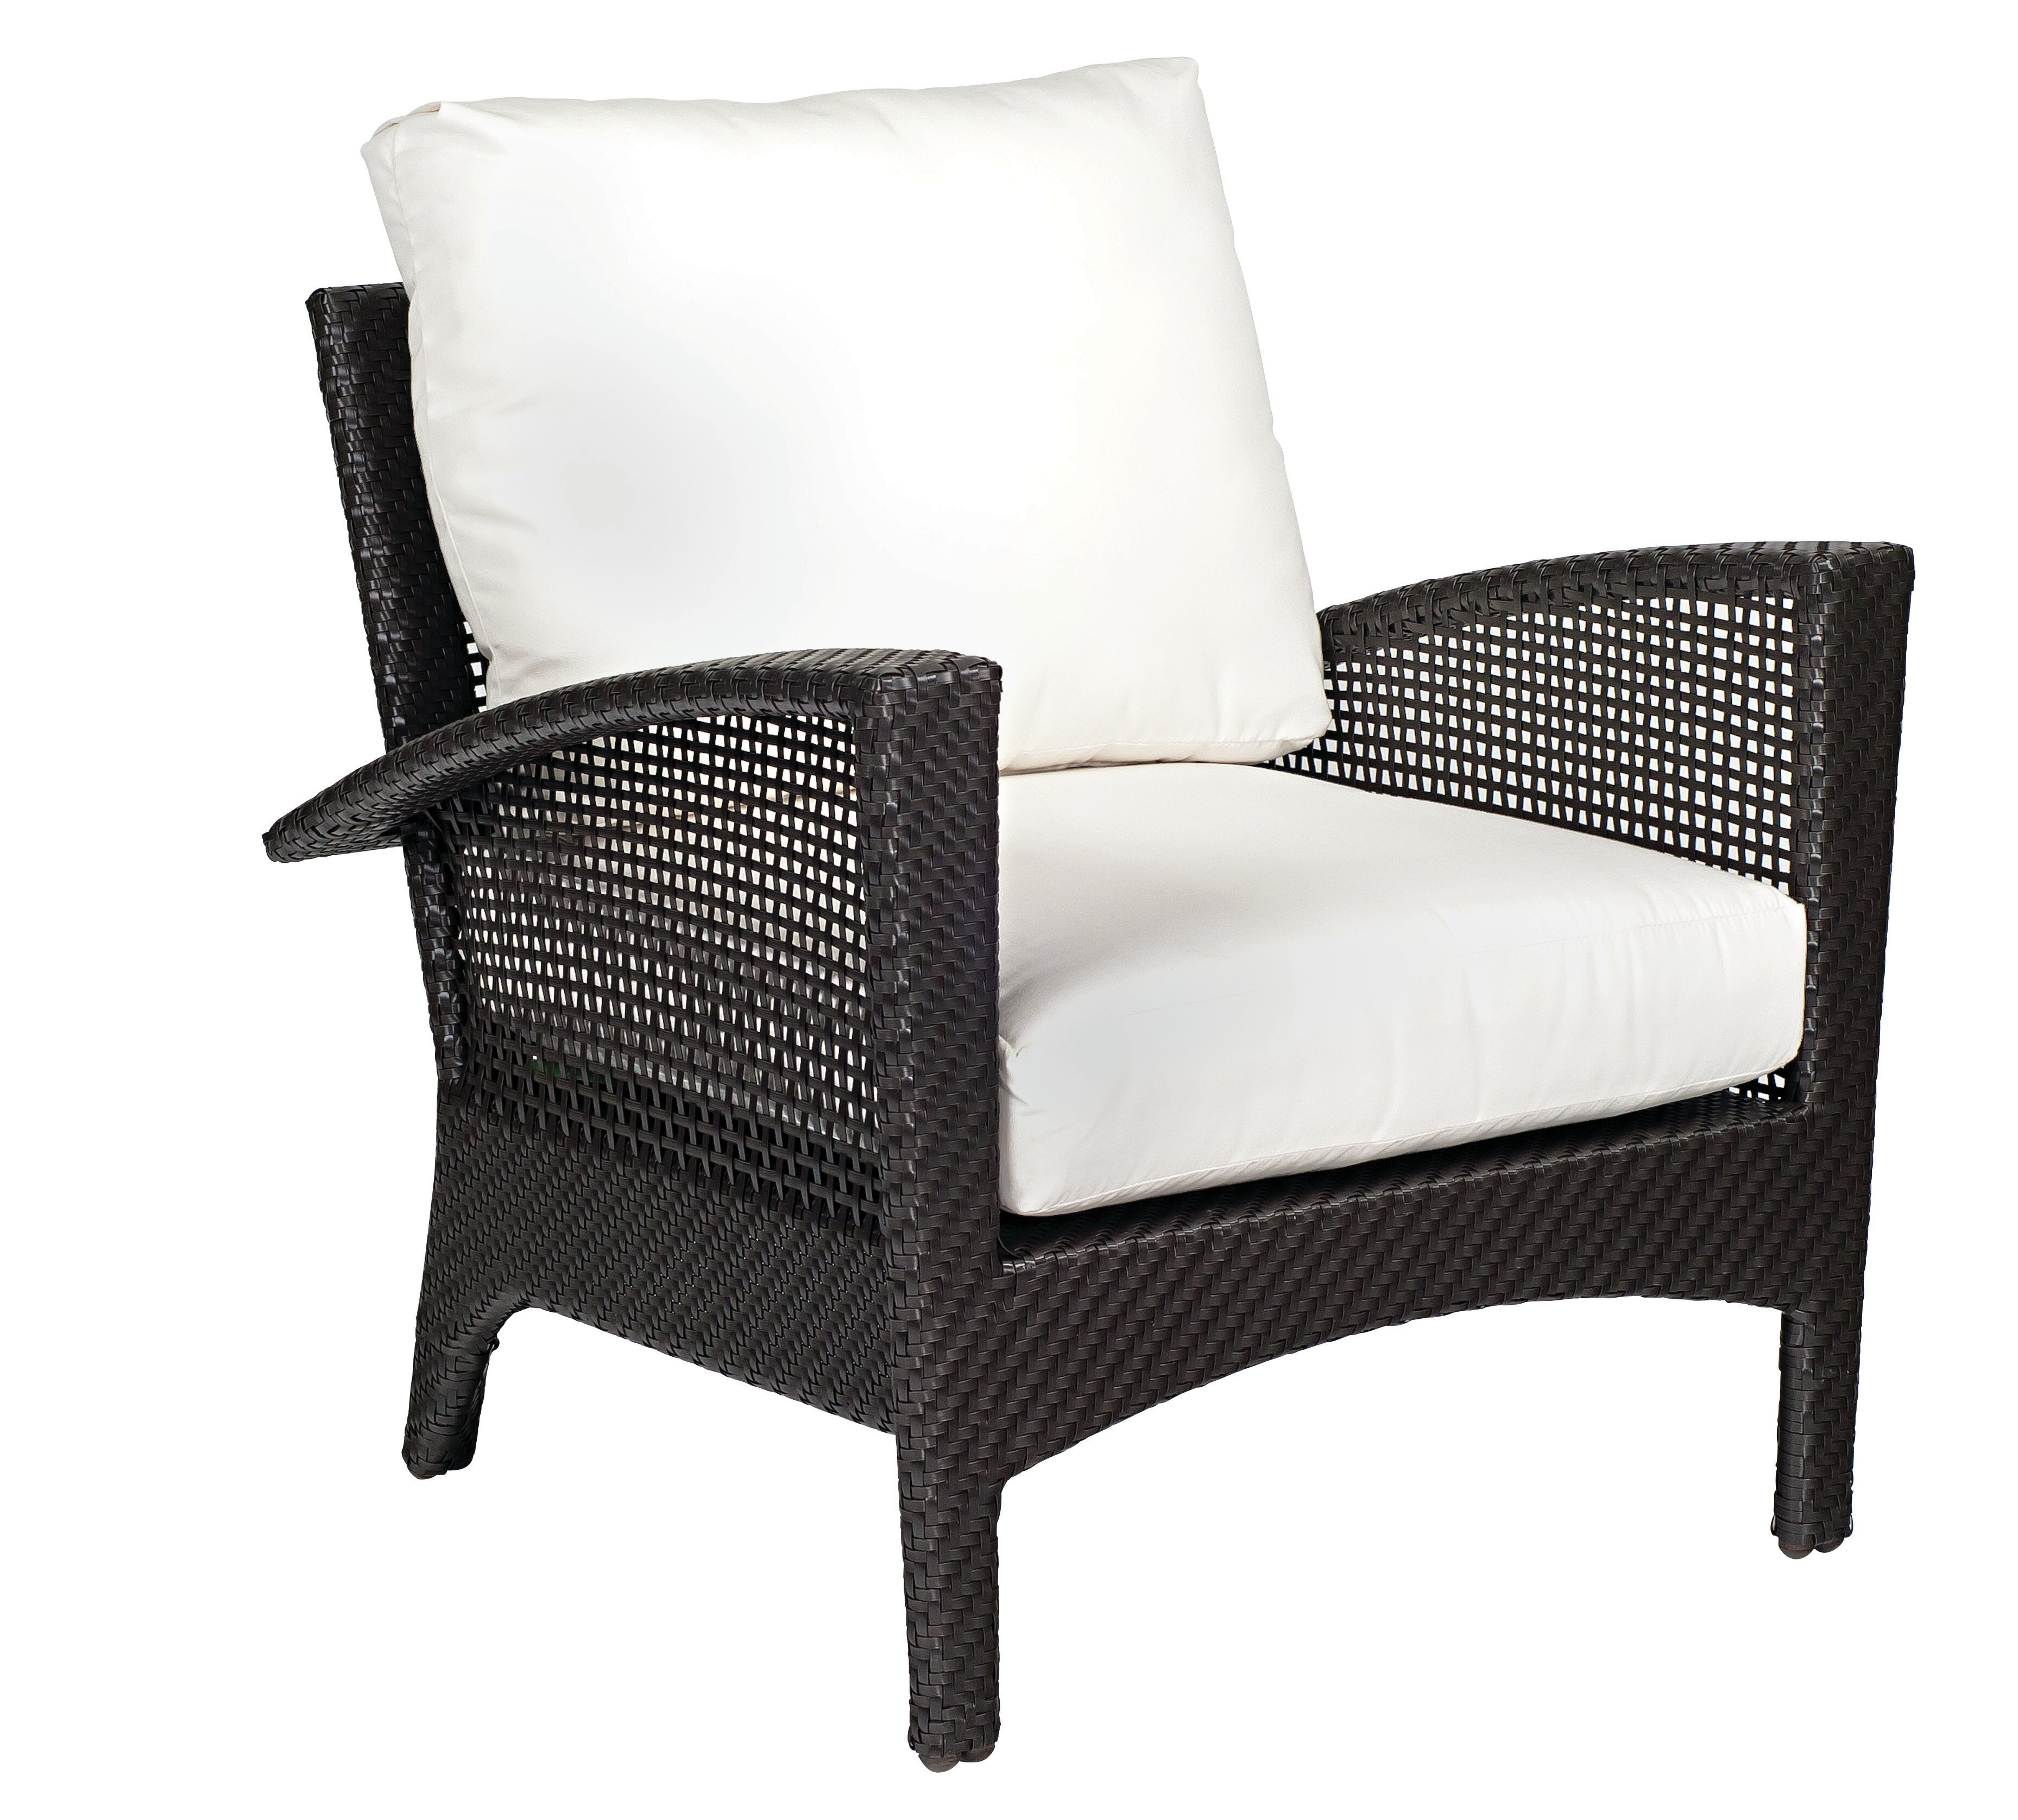 Trinidad Patio Chair With Cushions within dimensions 3716 X 3352